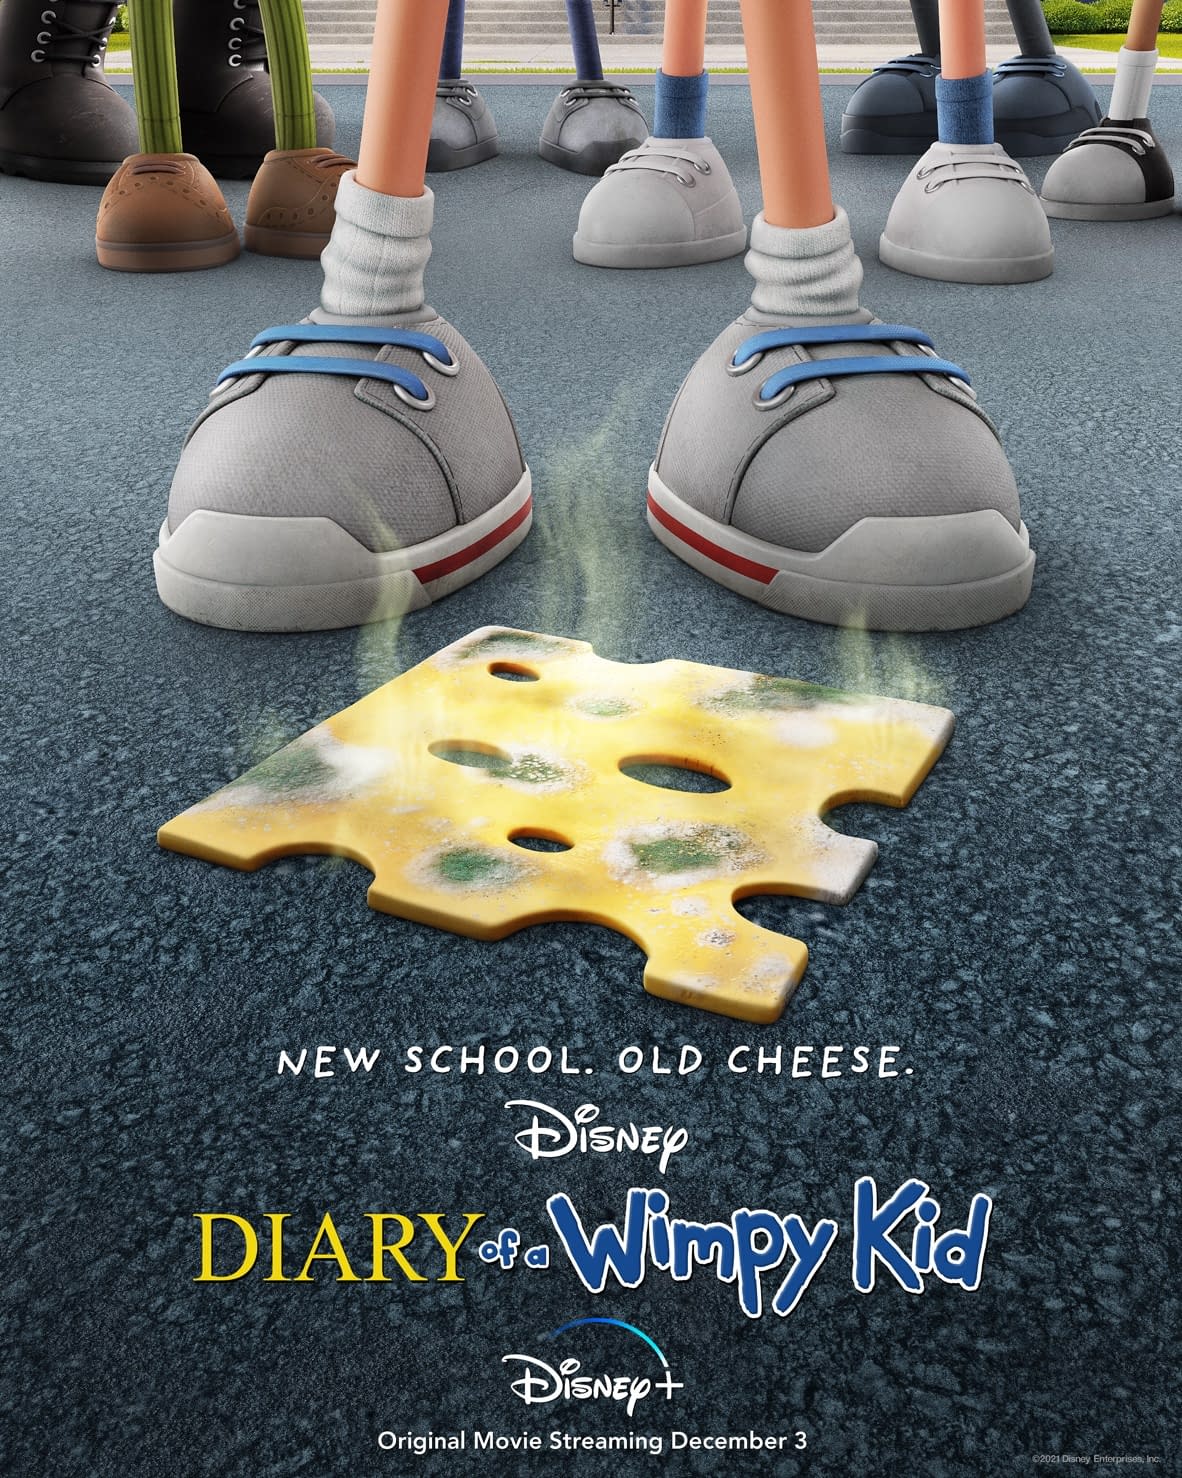 Author Jeff Kinney Talks About the New Movie, Diary of a Wimpy Kid